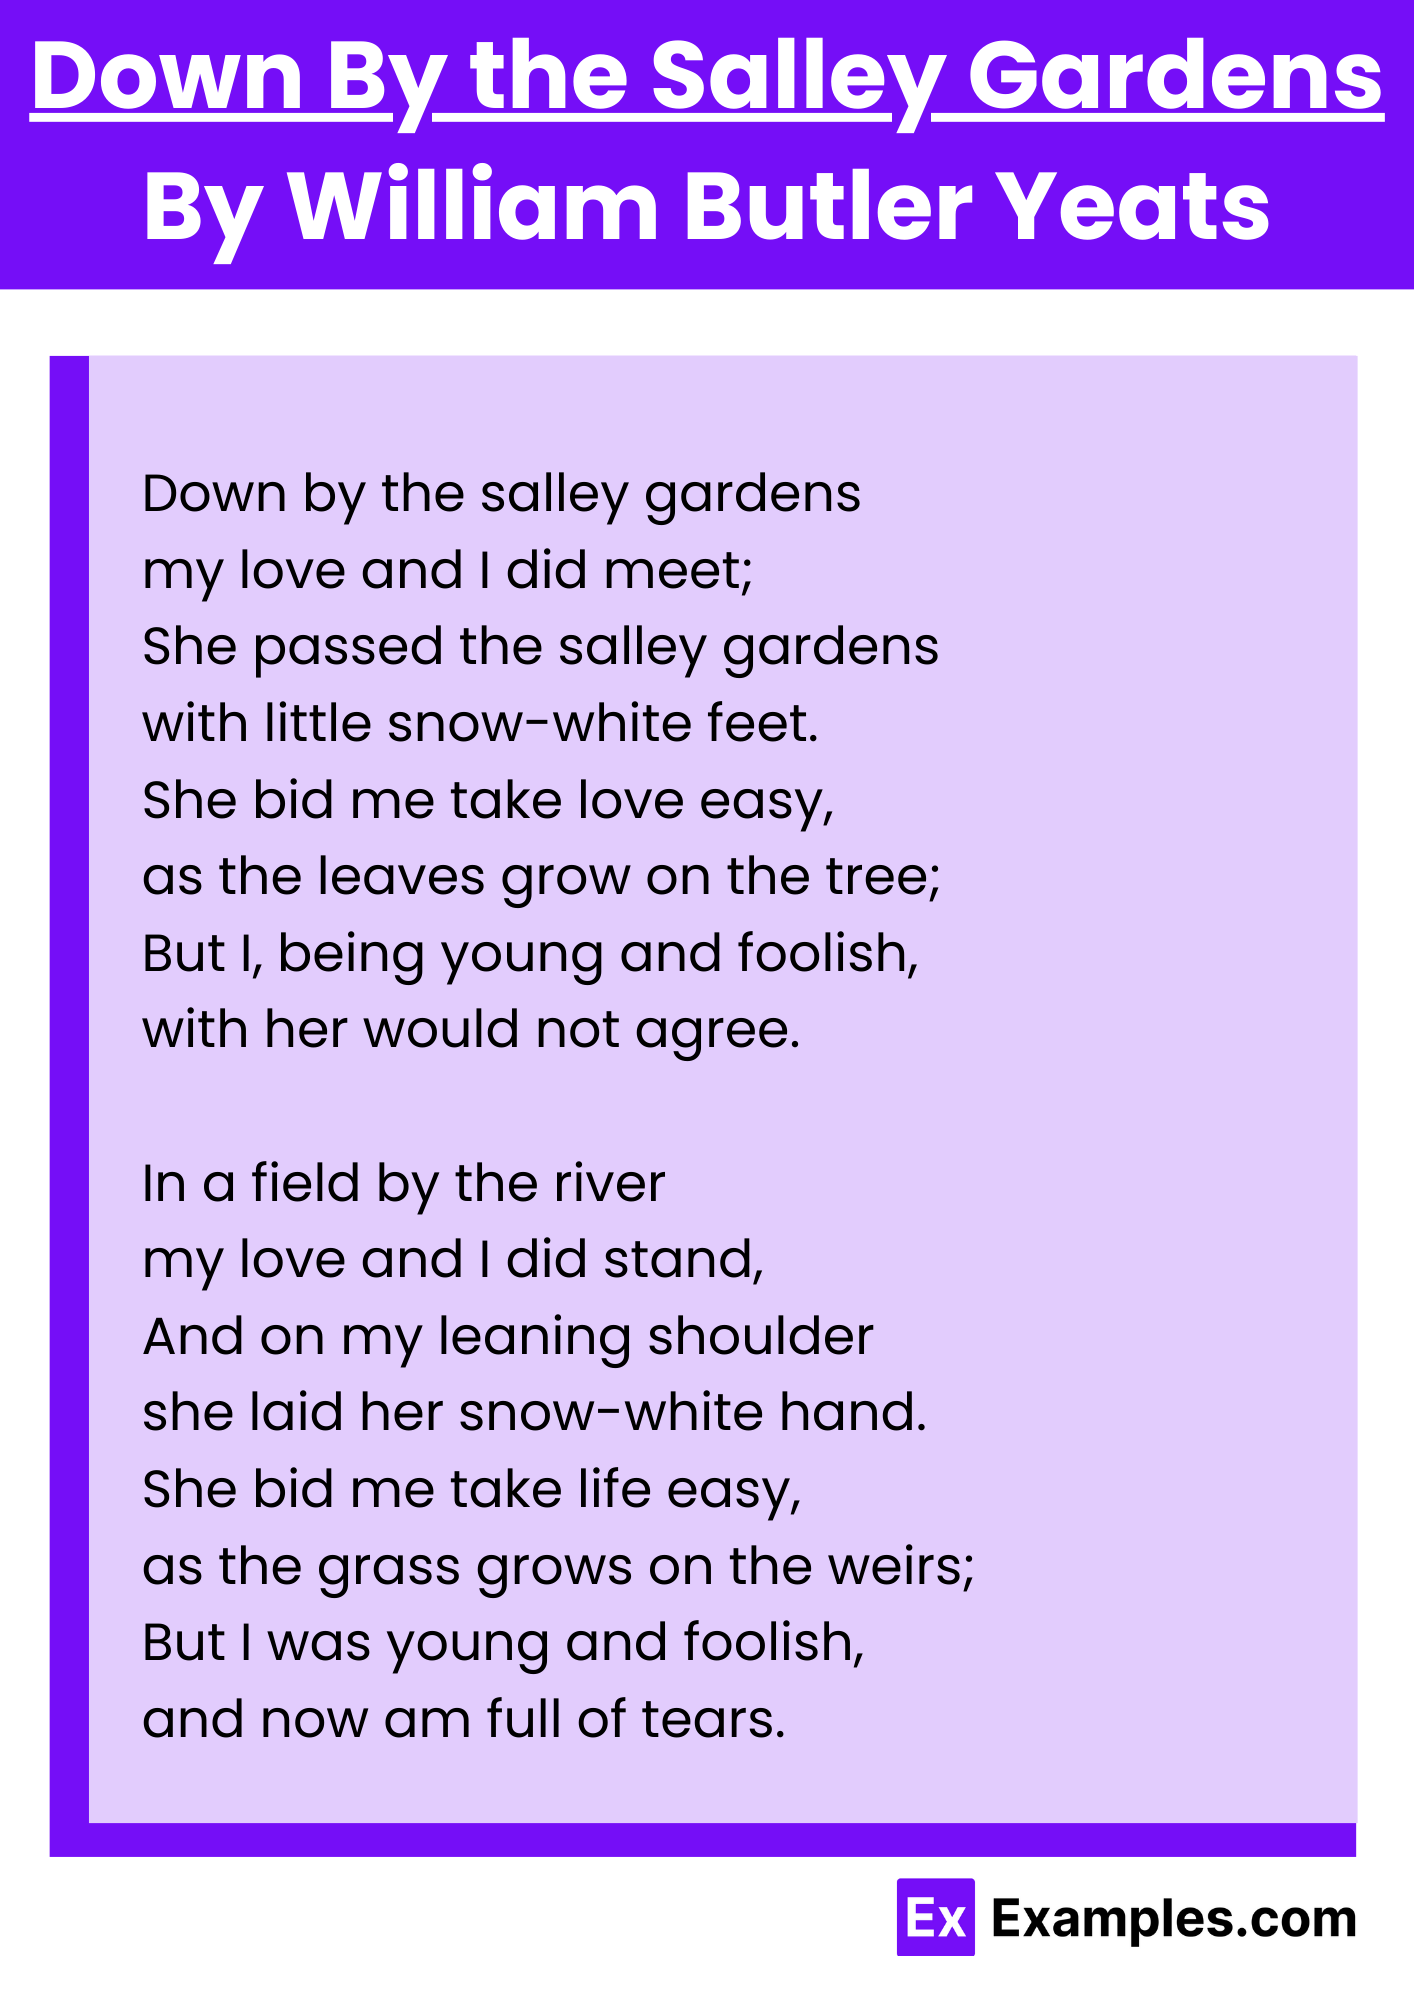 Down By the Salley Gardens By William Butler Yeats